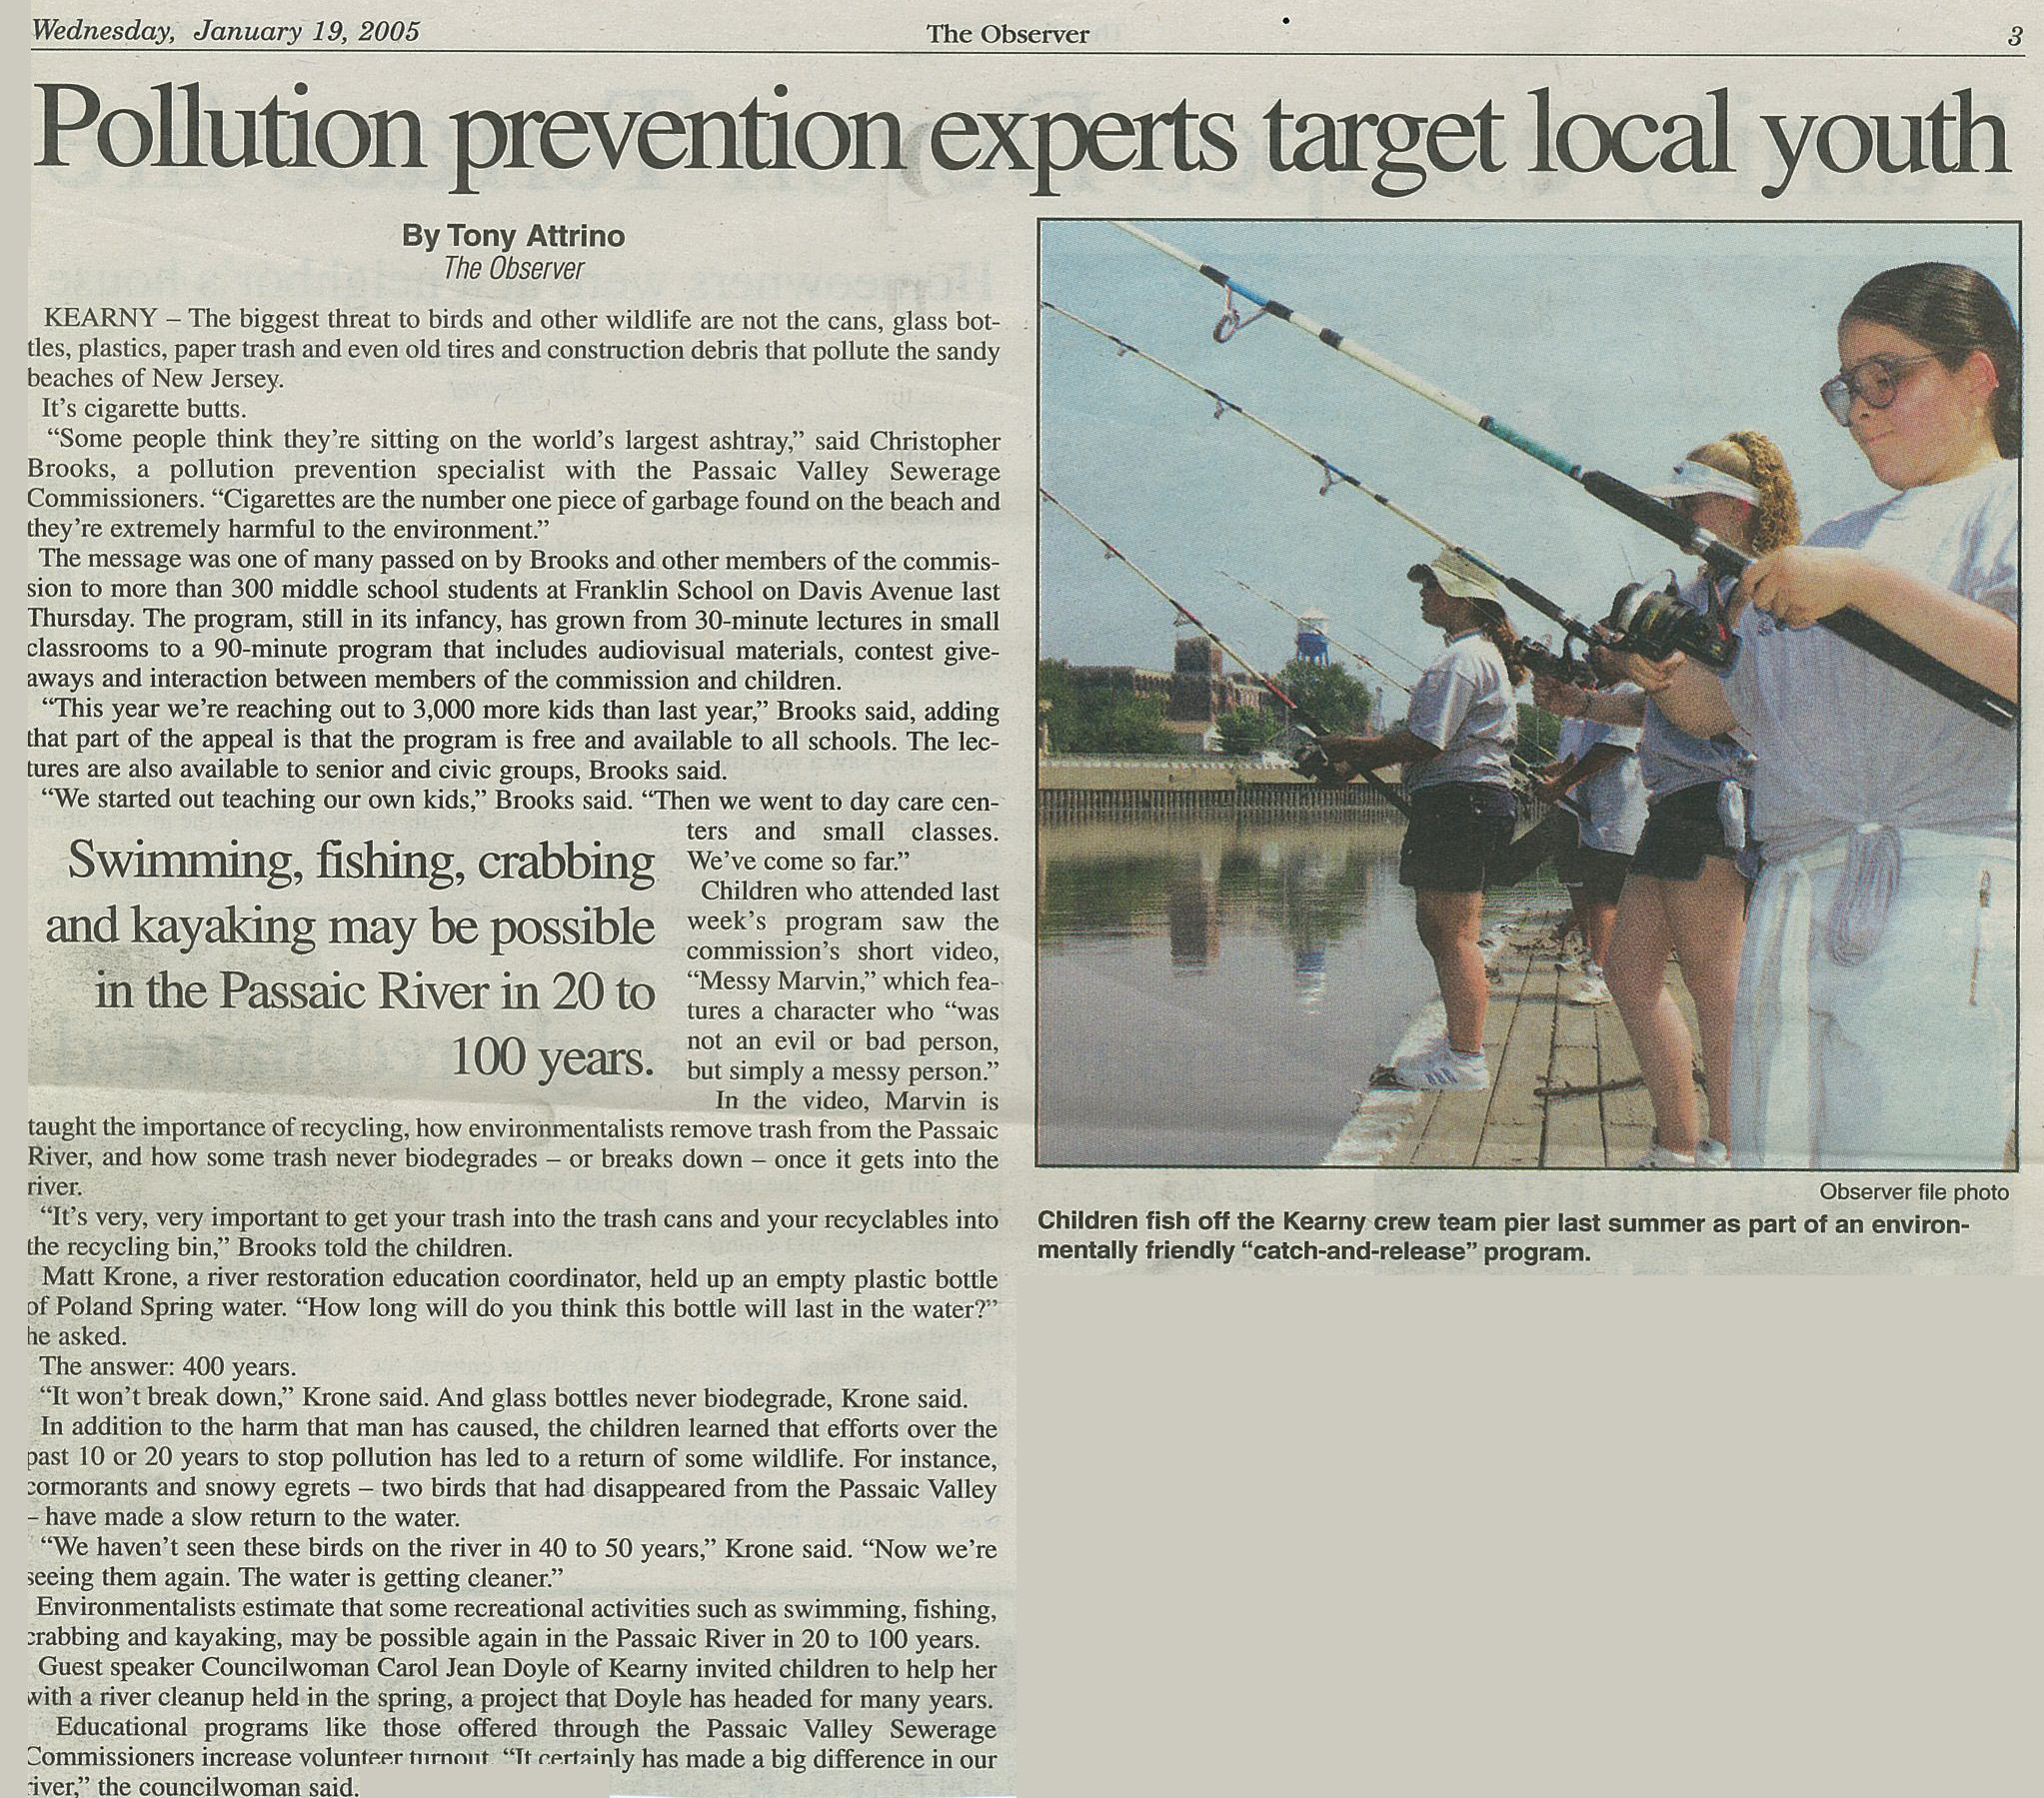 water pollution news articles